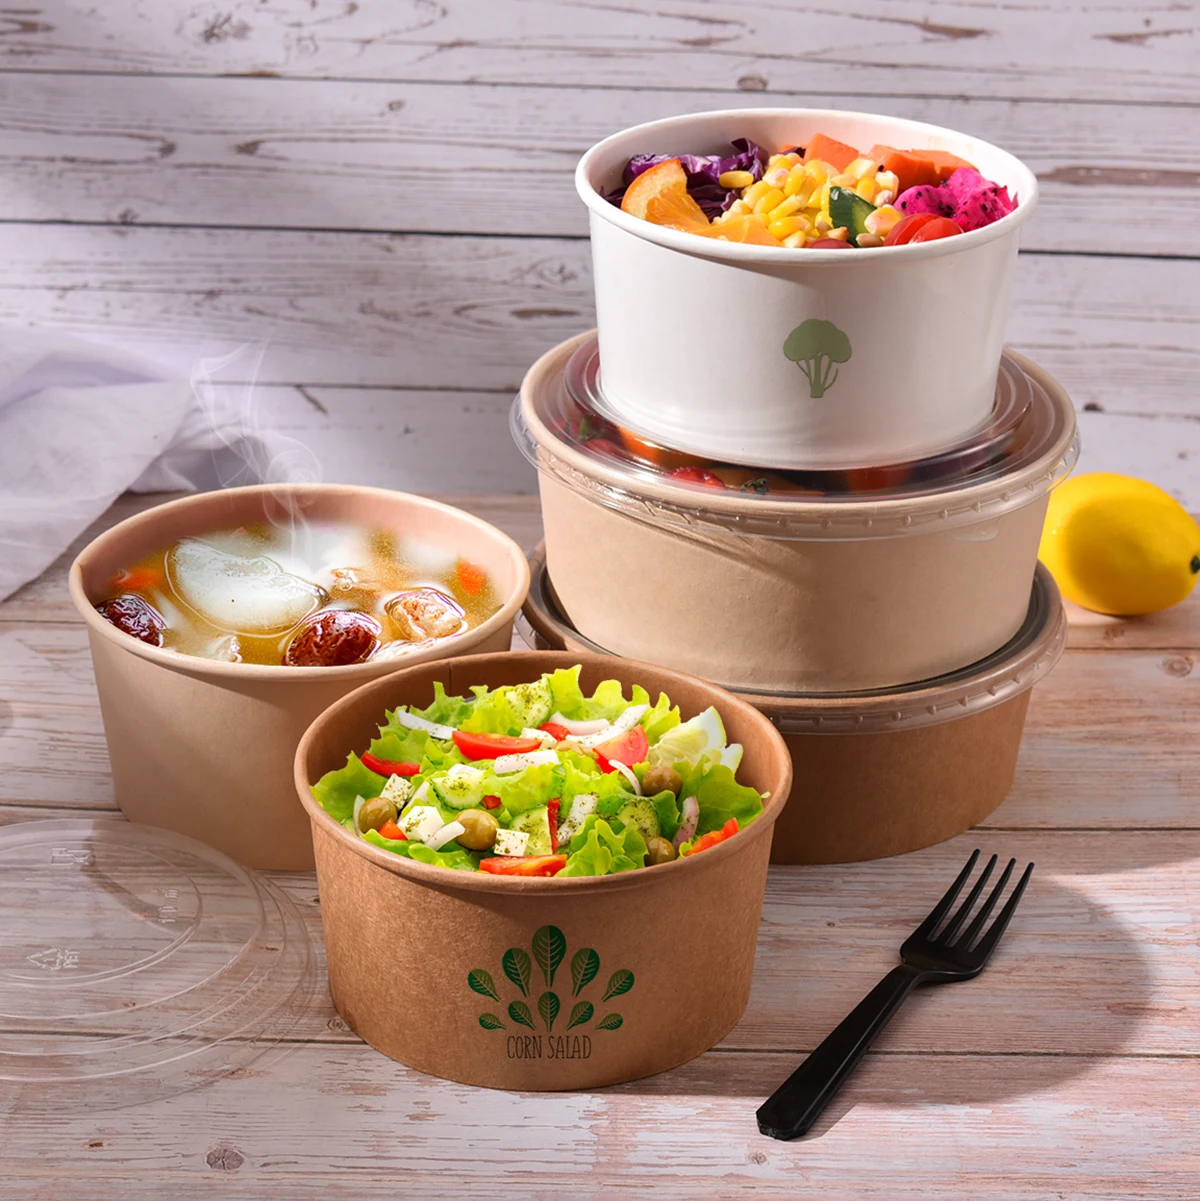 500ml, 750ml, 1000ml, 1300ml disposable kraft white and bamboo unique paper food salad bowls